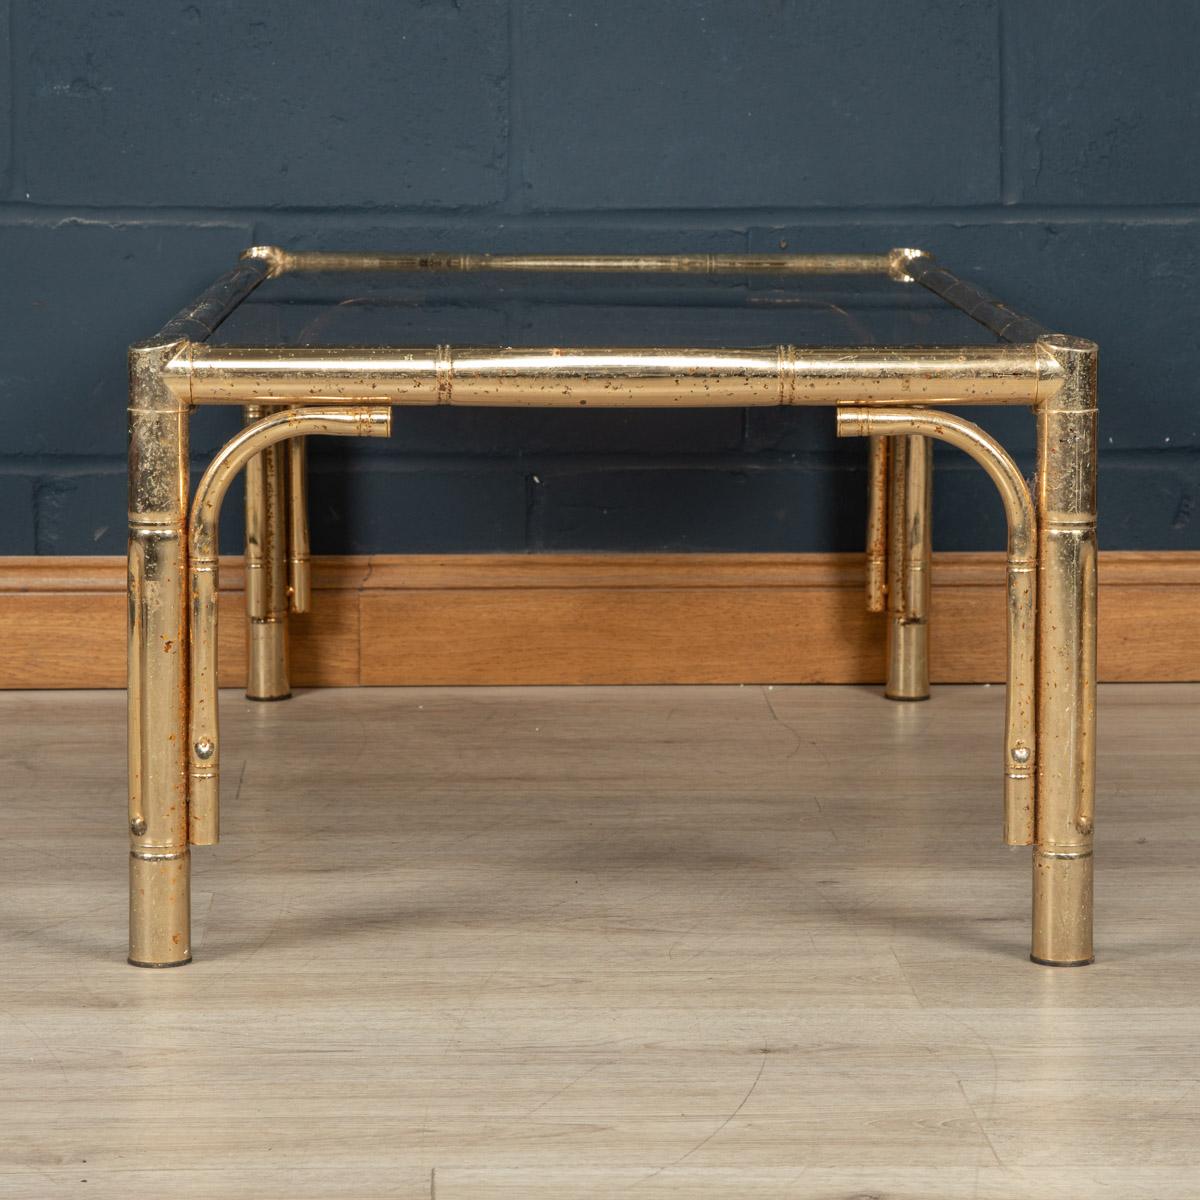 20th Century France Brass Coffee Table Attributable To Maison Jansen, c.1970 For Sale 2